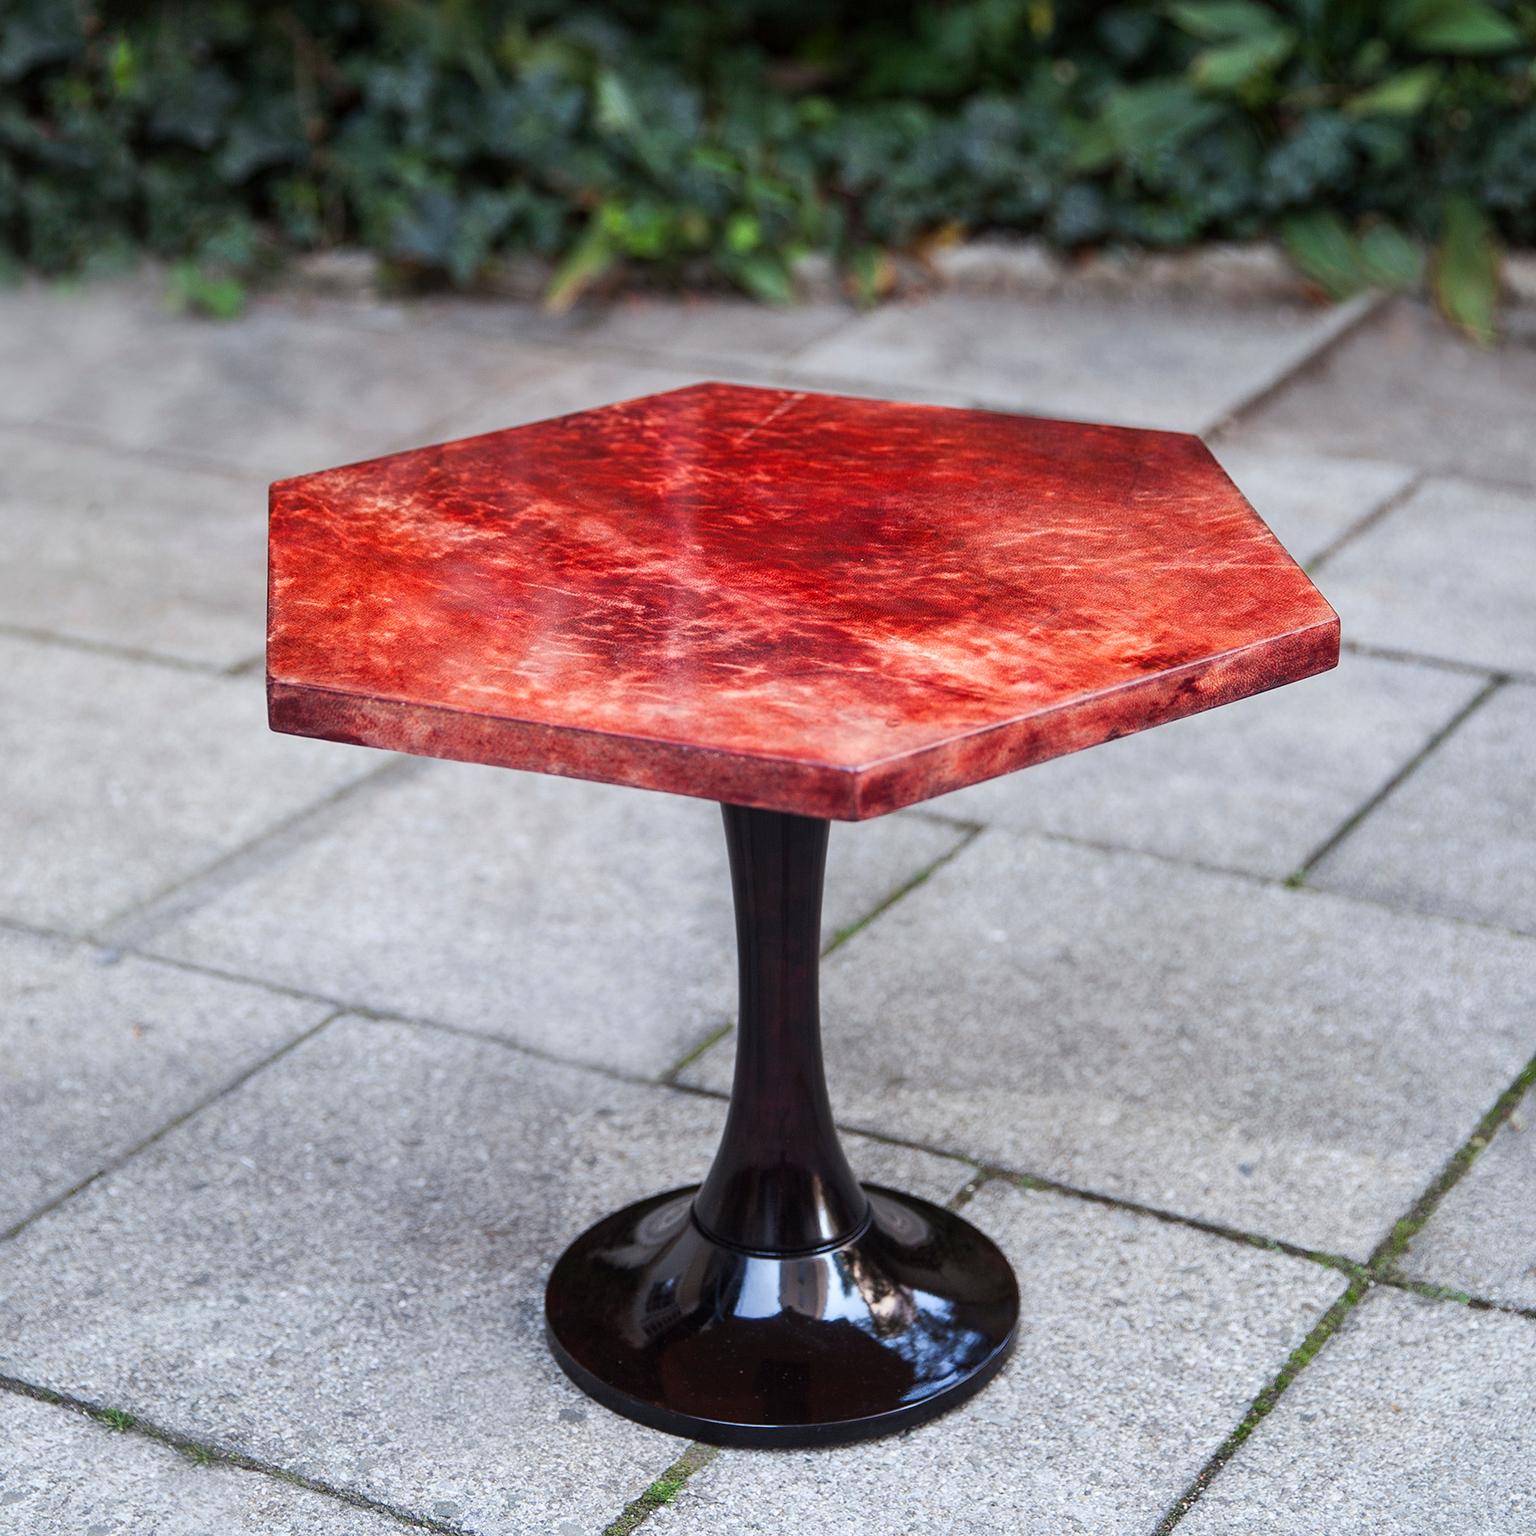 Wonderful hexagonal side table of Aldo Tura in lacquered goatskin.
This side table was executed, circa 1960 in a red parchment and mahogany base. Along with artists like Piero Fornasetti and Carlo Bugatti, Aldo Tura (1909-1963) definitely belonged